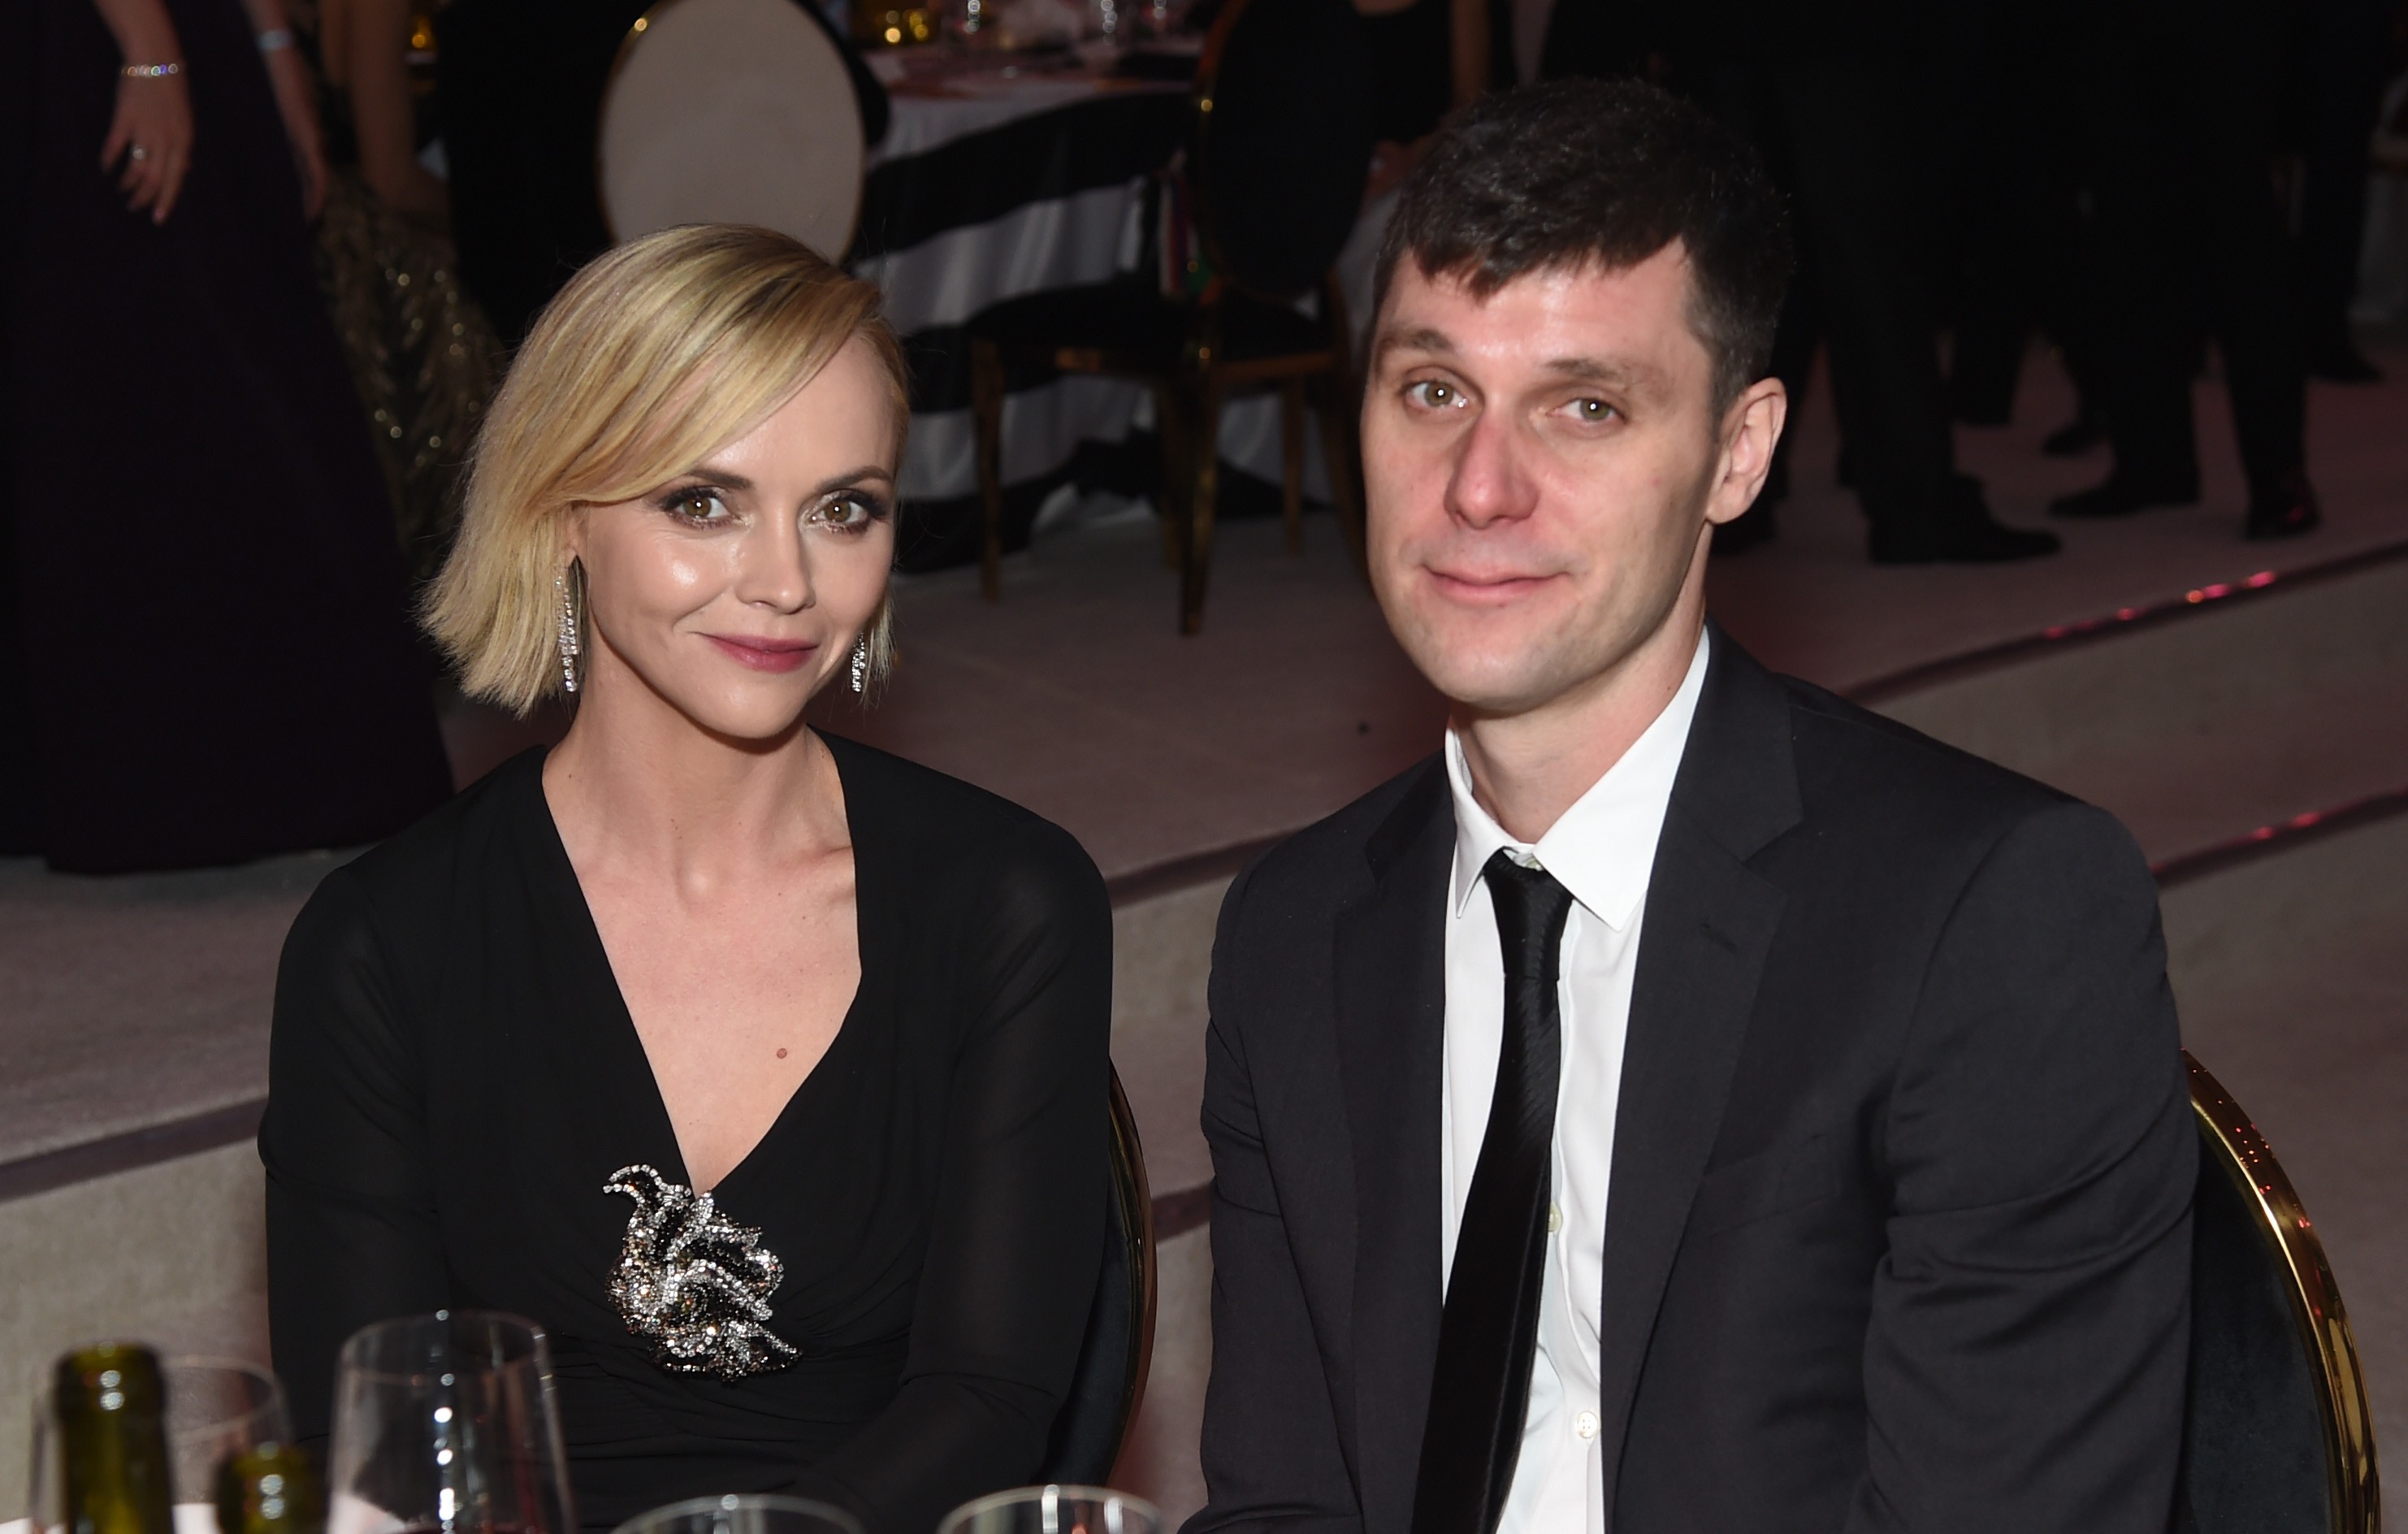 WEST HOLLYWOOD, CA - FEBRUARY 24: (L-R) Christina Ricci and James Heerdegen attend the 27th annual Elton John AIDS Foundation Academy Awards Viewing Party sponsored by IMDb and Neuro Drinks celebrating EJAF and the 91st Academy Awards on February 24, 2019 (Foto: Getty Images for EJAF)